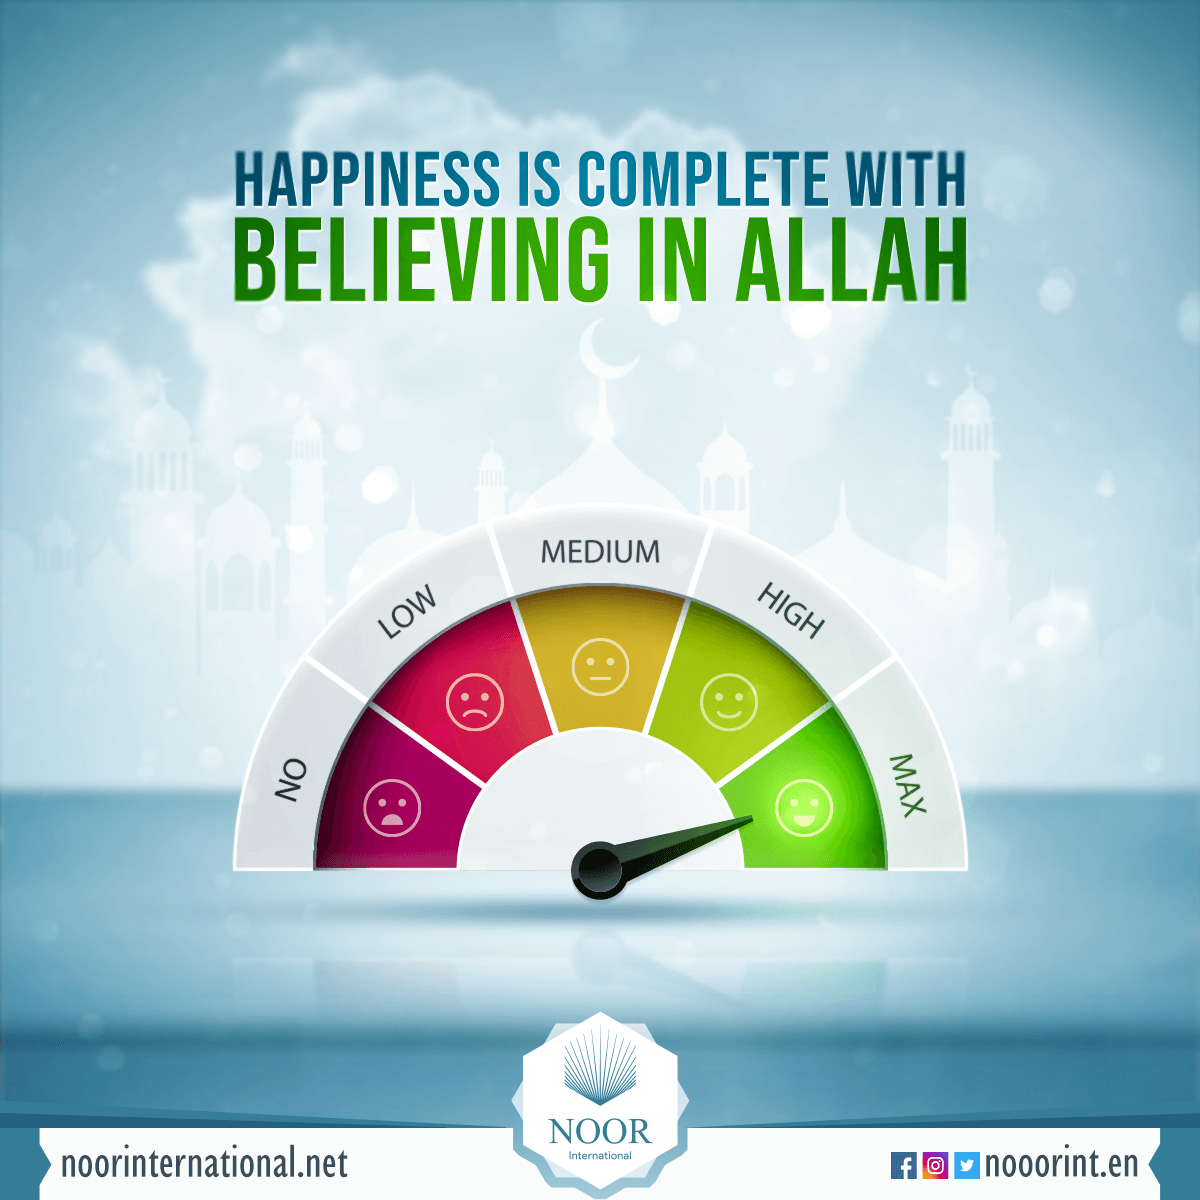 Happiness is complete with believing in Allah